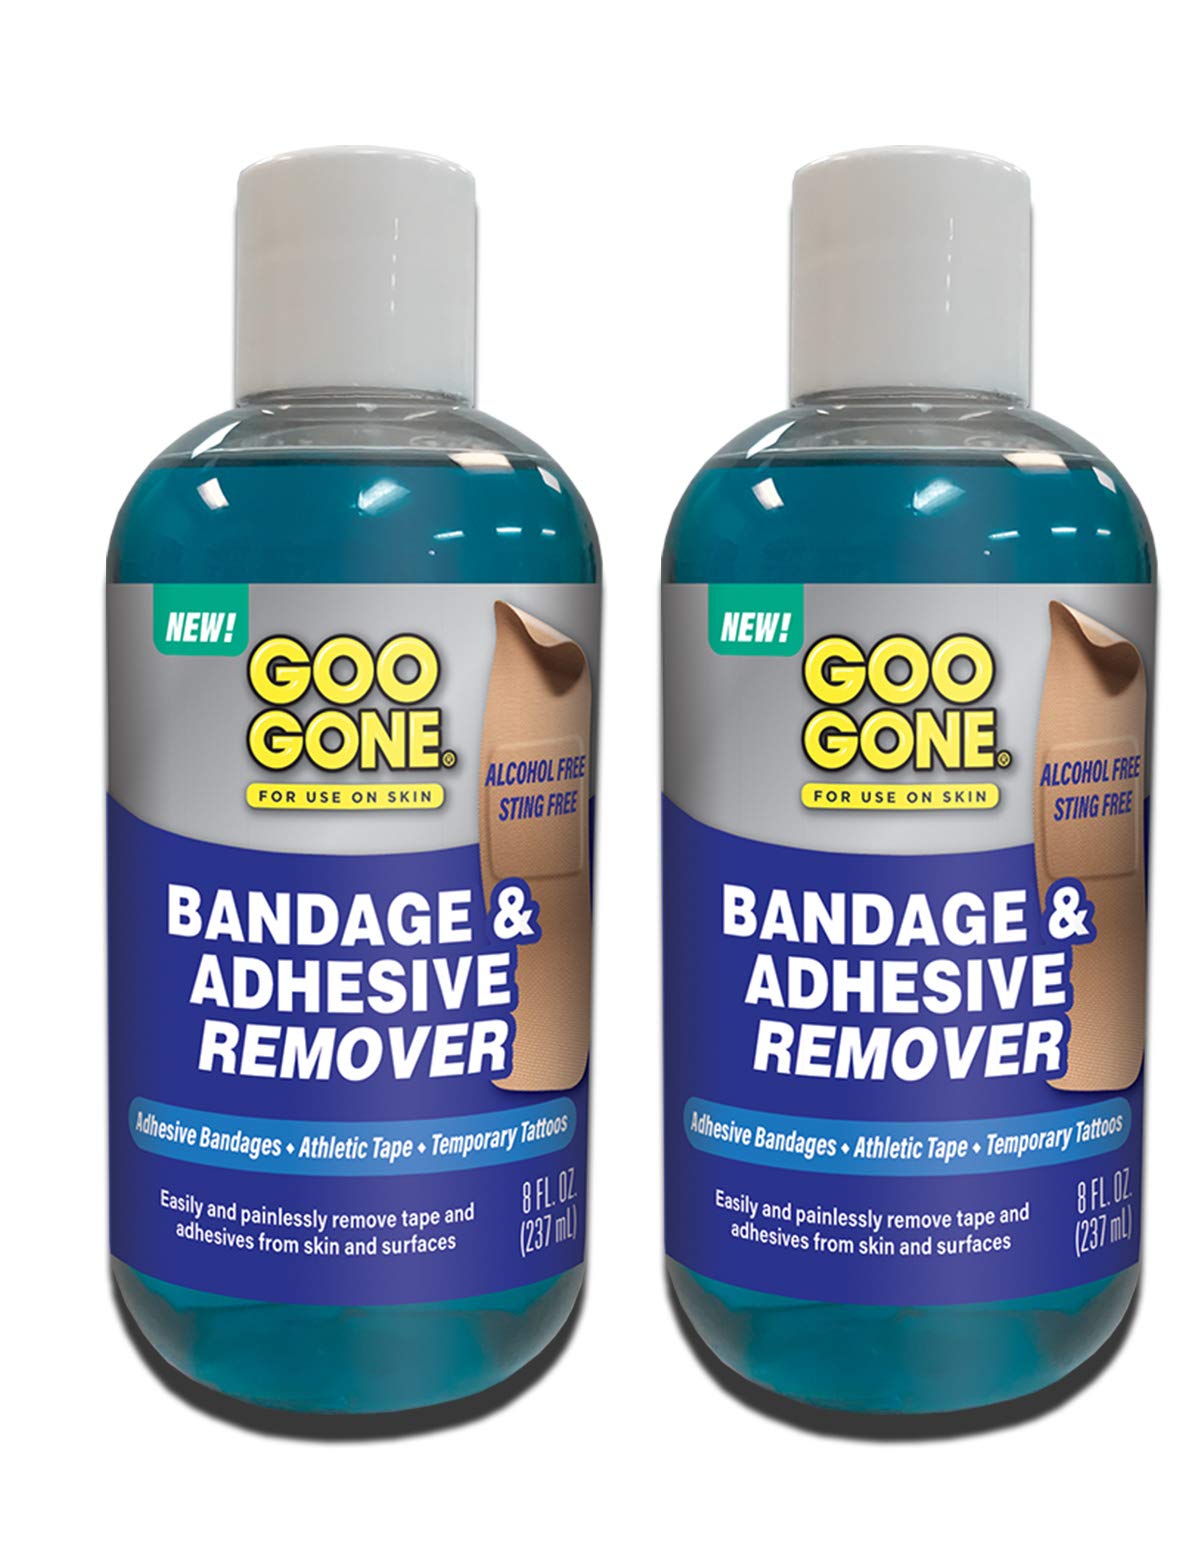 Goo Gone: How to Remove Adhesives, Grease, & More!